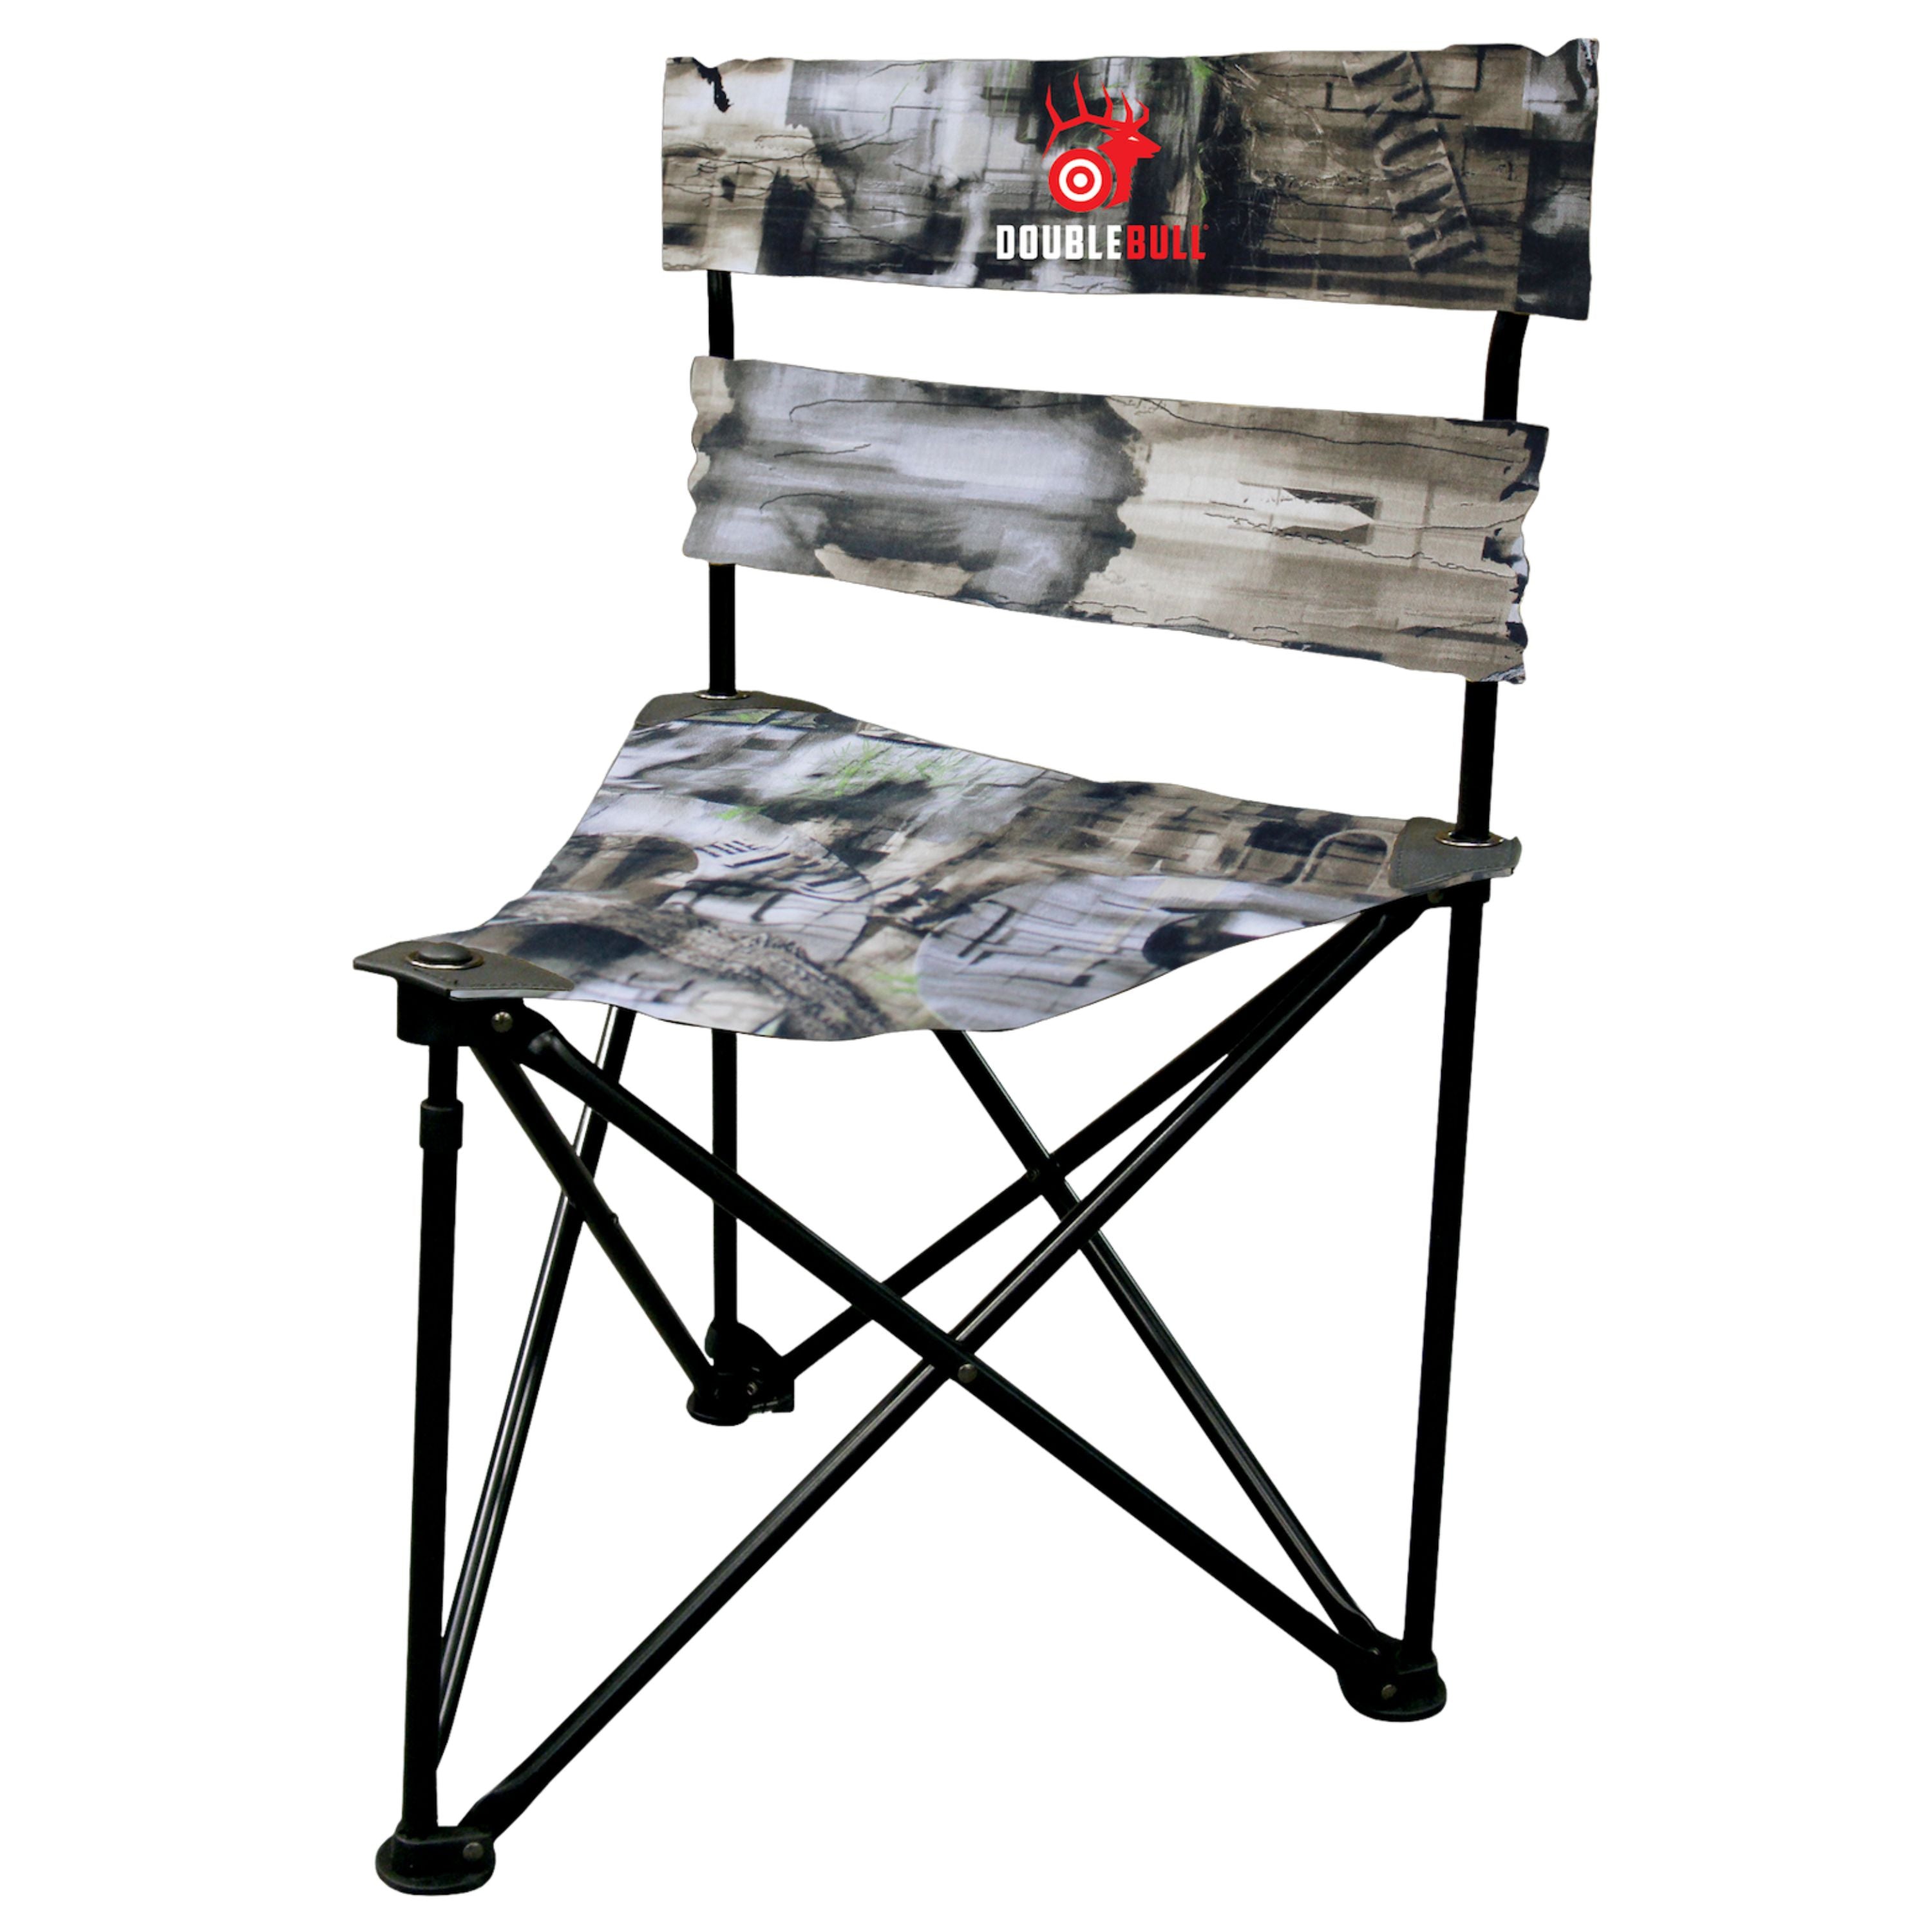 "Double Dull" Blind tri stool